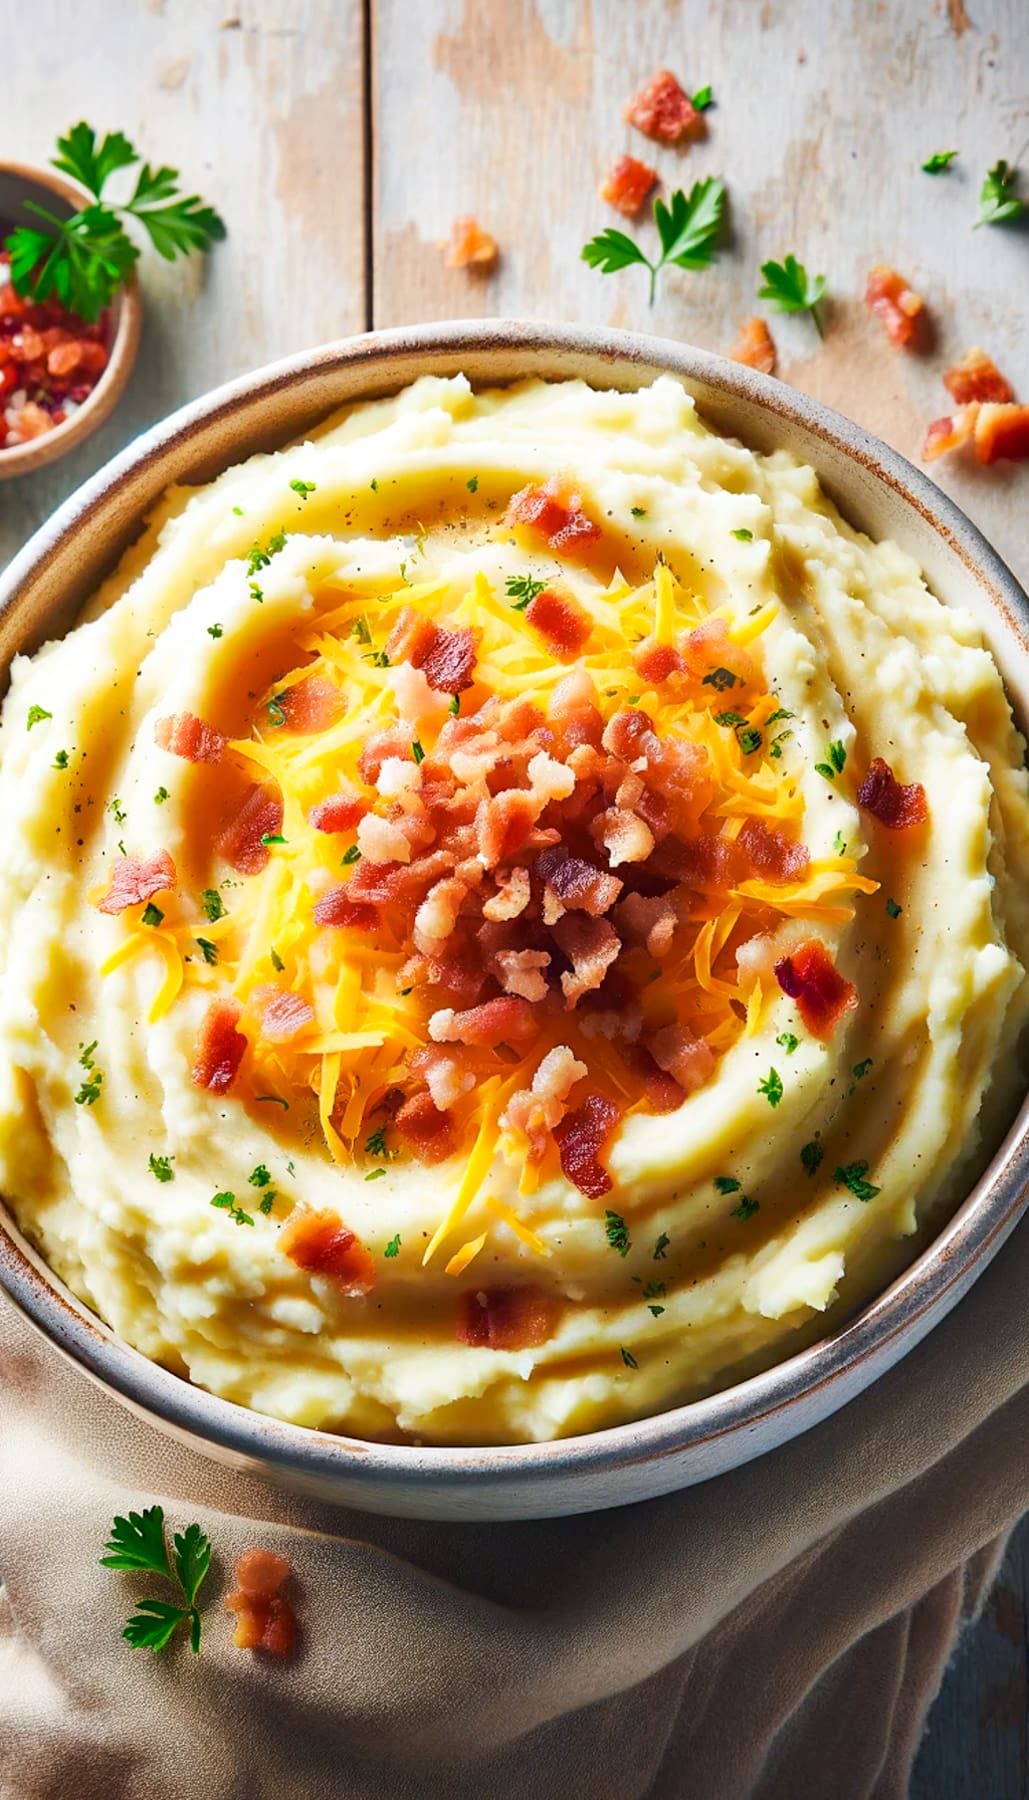 A serving bowl filled with fluffy mashed potatoes, now topped with melted cheese, diced bacon, and chopped parsley.